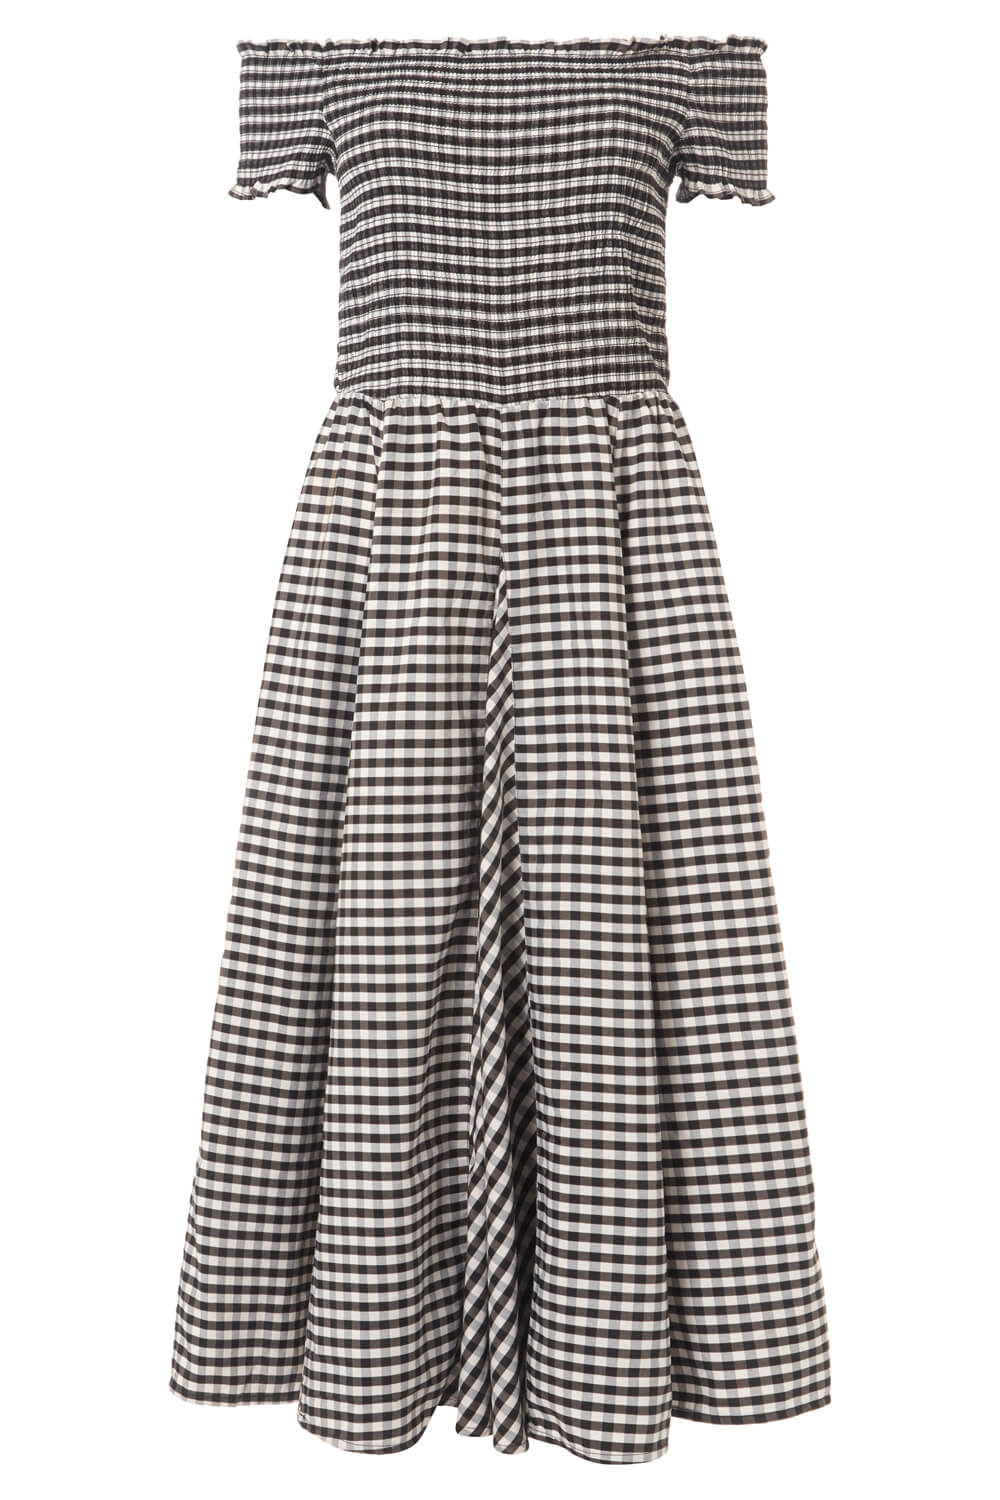 Black Gingham Bardot Fit and Flare Dress, Image 5 of 5